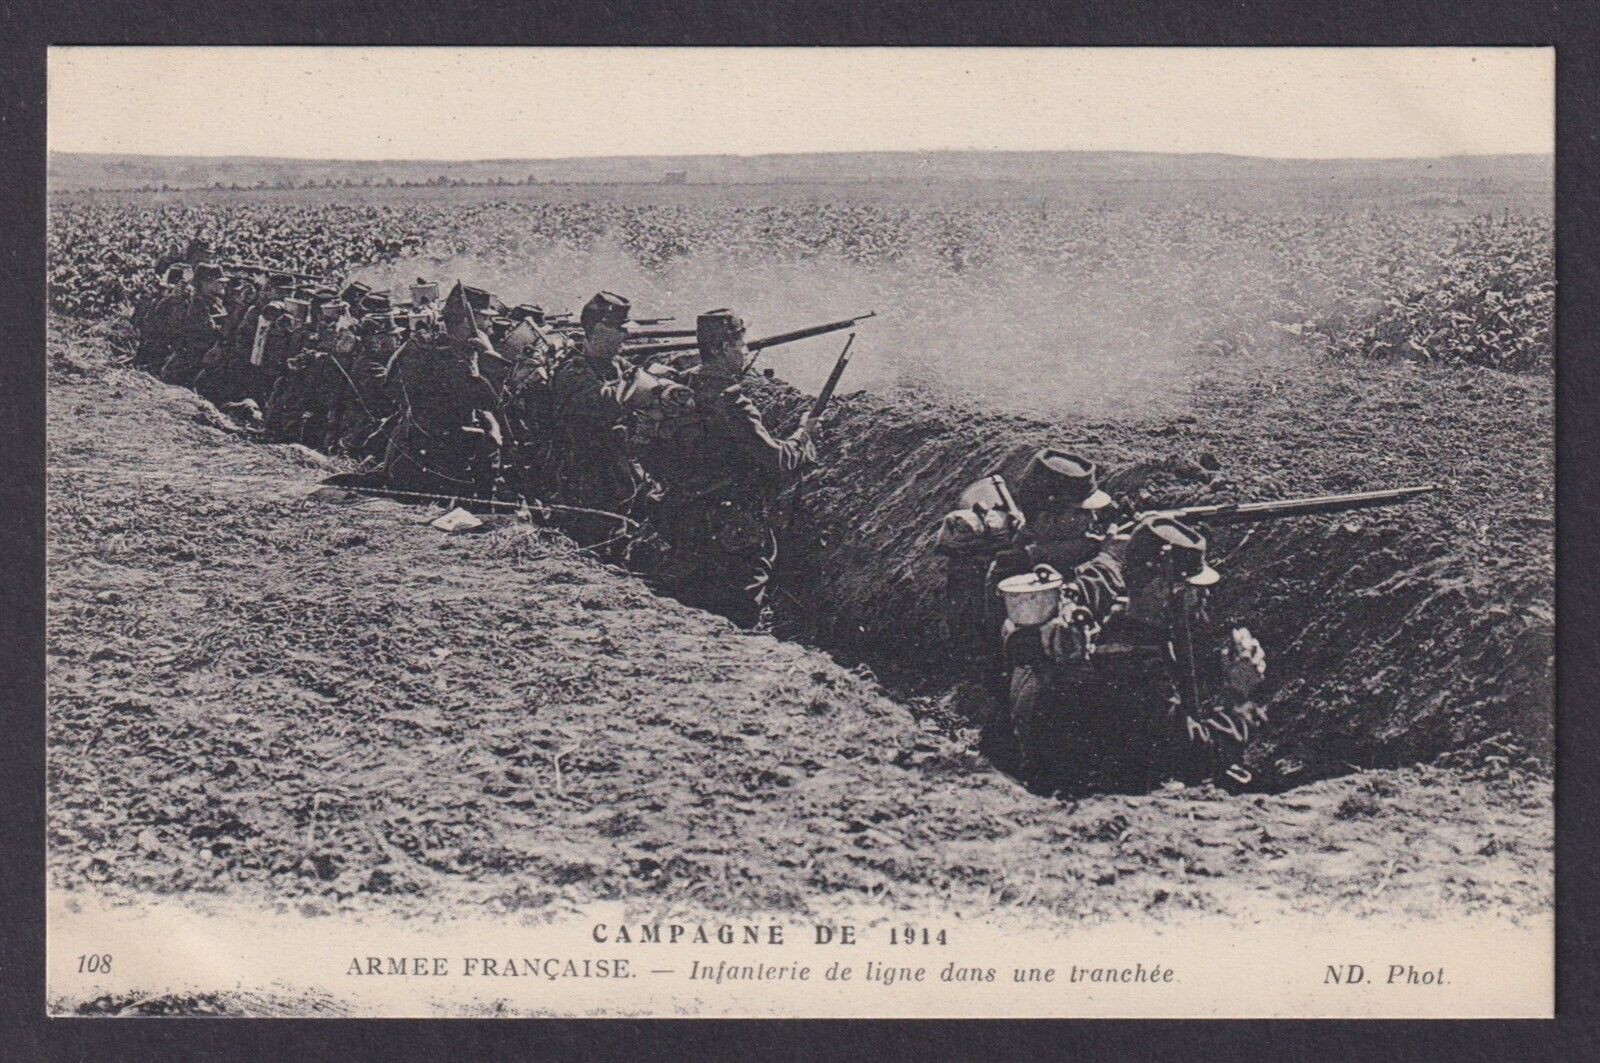 FRANCE, Postcard, Line infantry in a trench, Propaganda, WWI